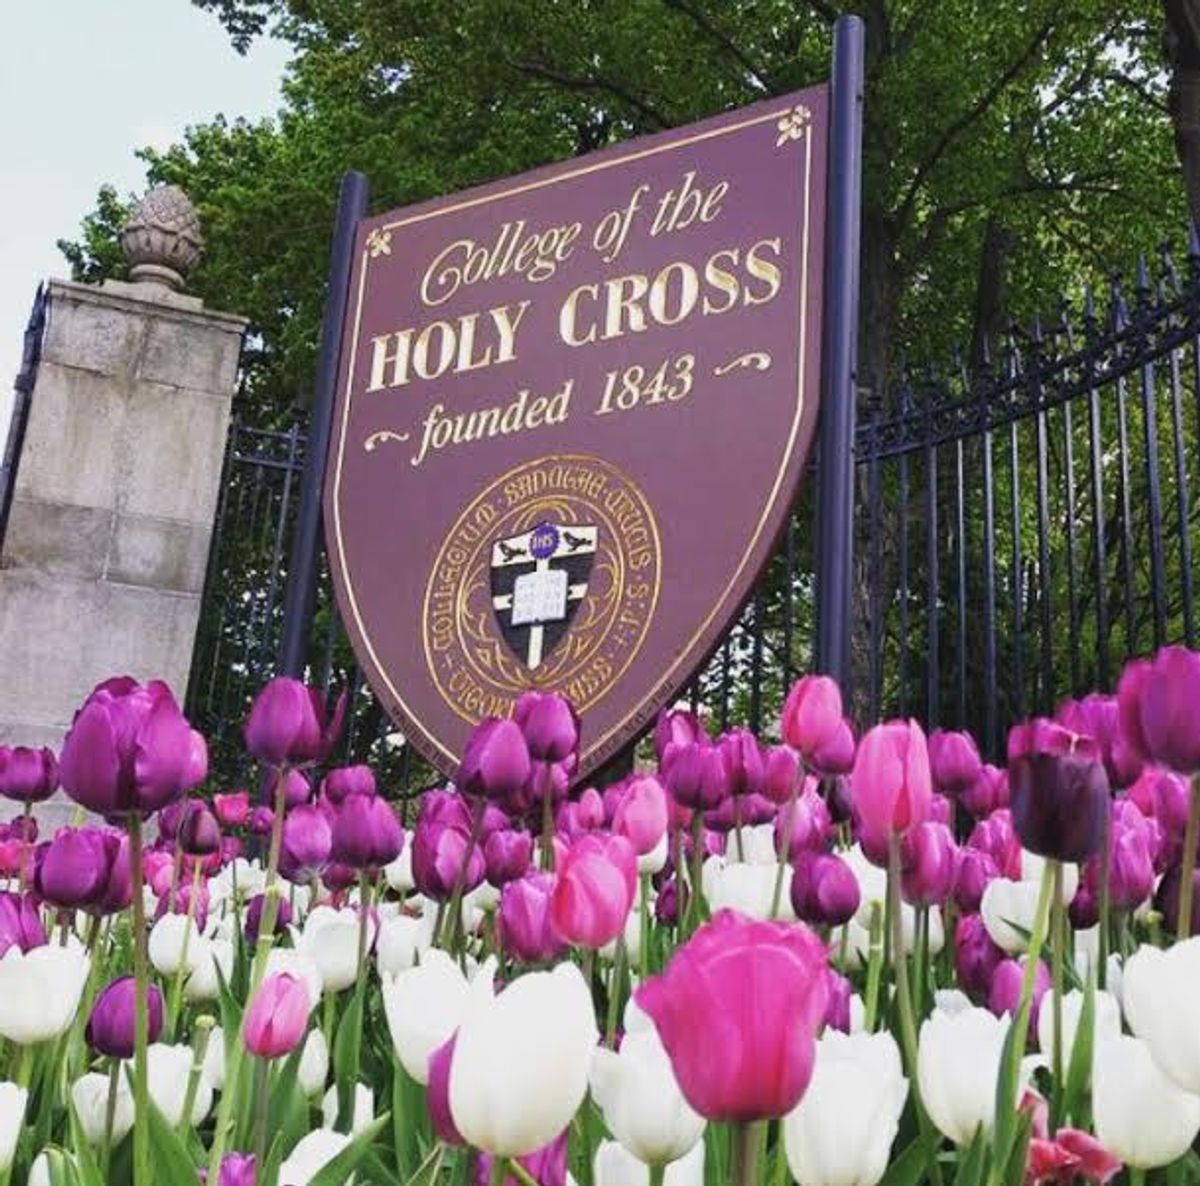 10 Things To 'Hate' About Holy Cross